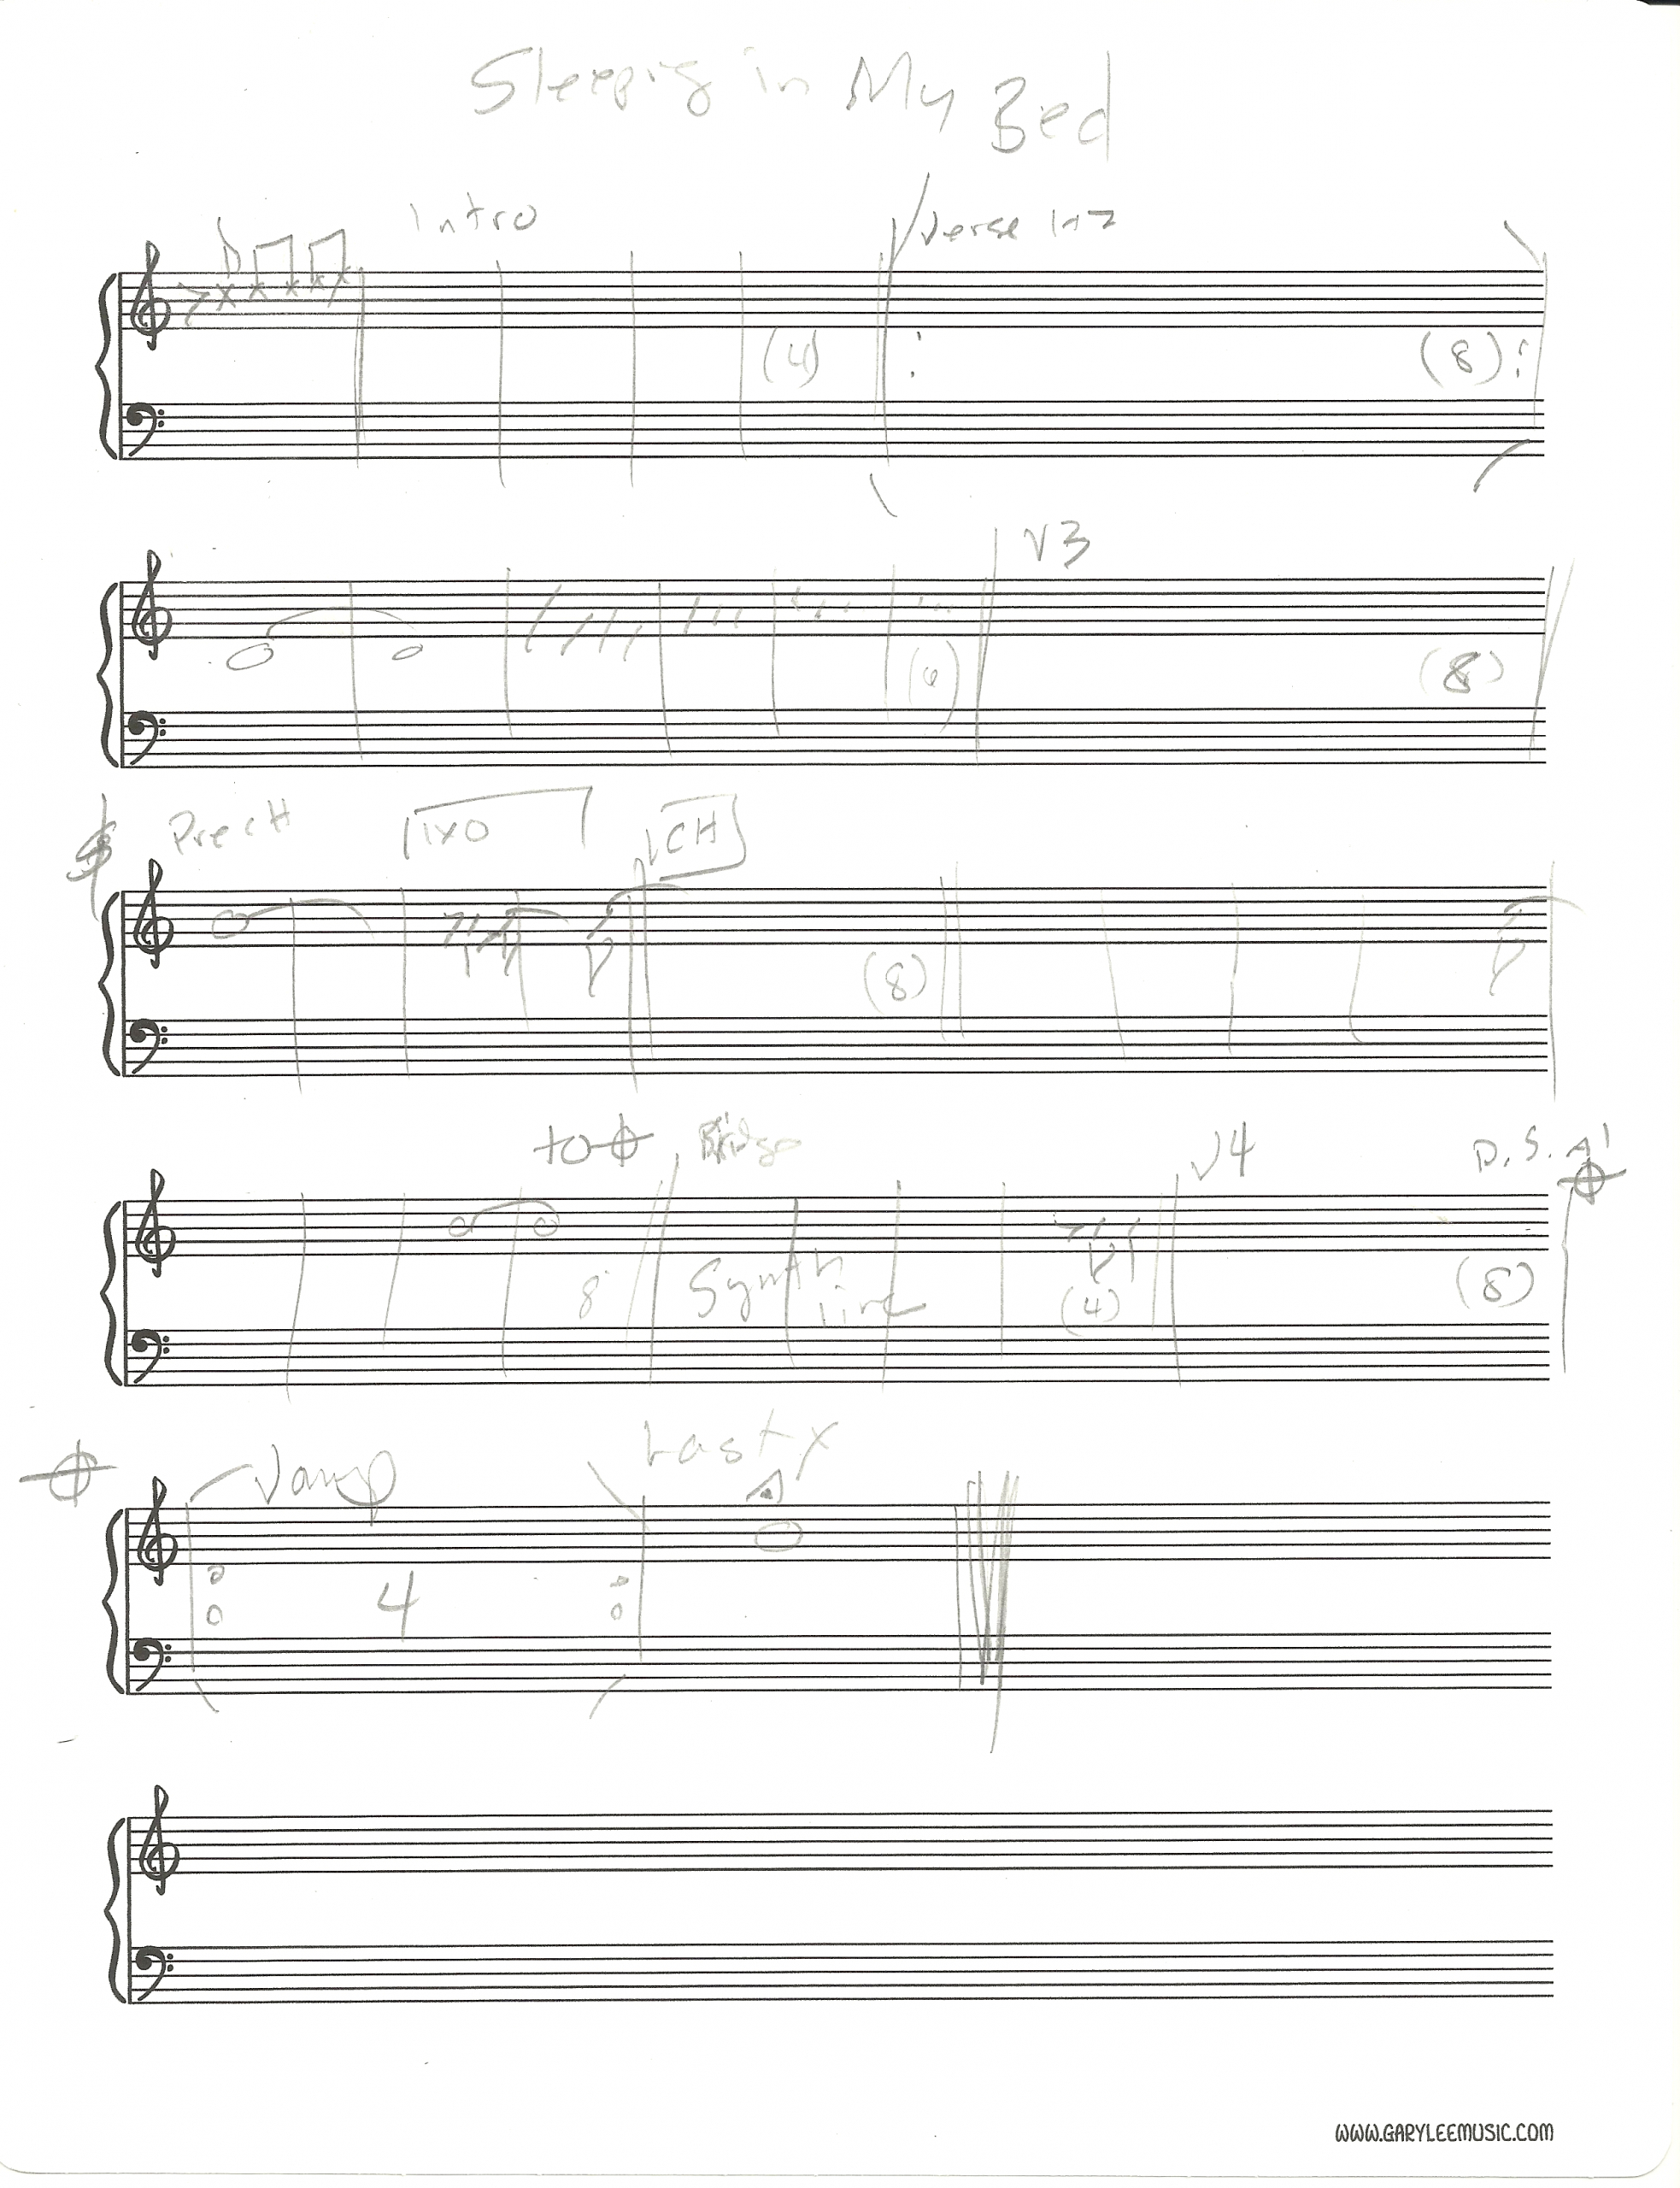 Sheet Music Template Blank For Word Free Pdf Spreadsheet Intended For Blank Sheet Music Template For Word